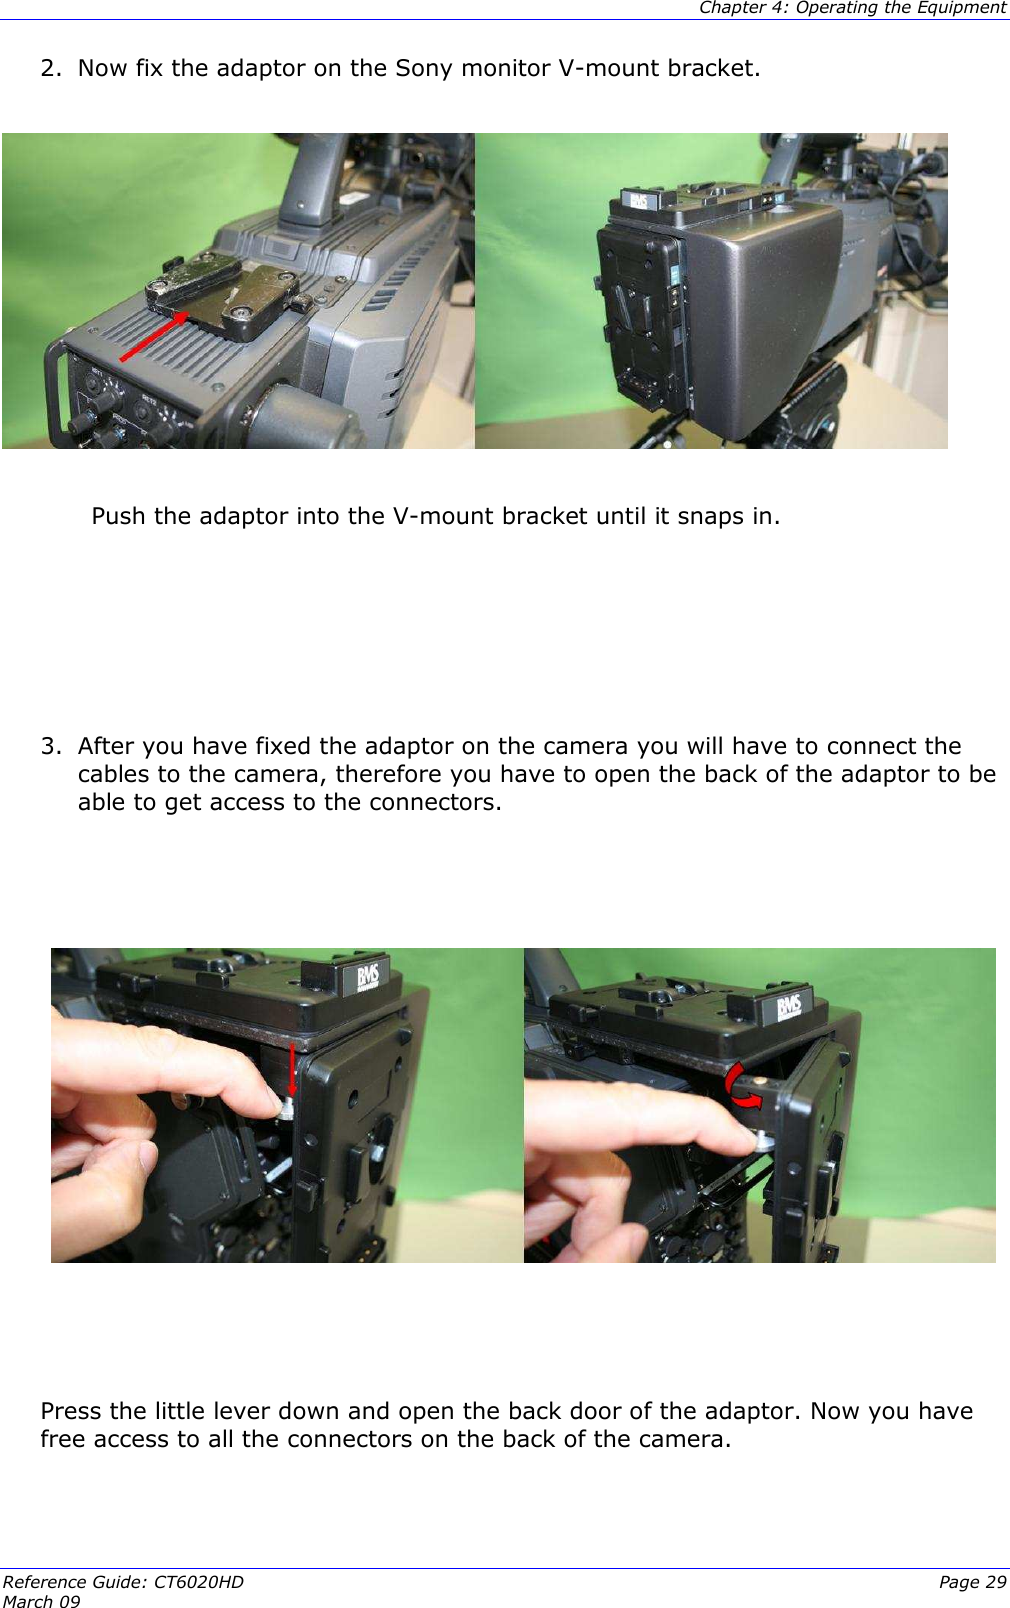  Chapter 4: Operating the Equipment Reference Guide: CT6020HD  Page 29 March 09   2. Now fix the adaptor on the Sony monitor V-mount bracket.               Push the adaptor into the V-mount bracket until it snaps in.      3. After you have fixed the adaptor on the camera you will have to connect the cables to the camera, therefore you have to open the back of the adaptor to be able to get access to the connectors.        Press the little lever down and open the back door of the adaptor. Now you have free access to all the connectors on the back of the camera.  